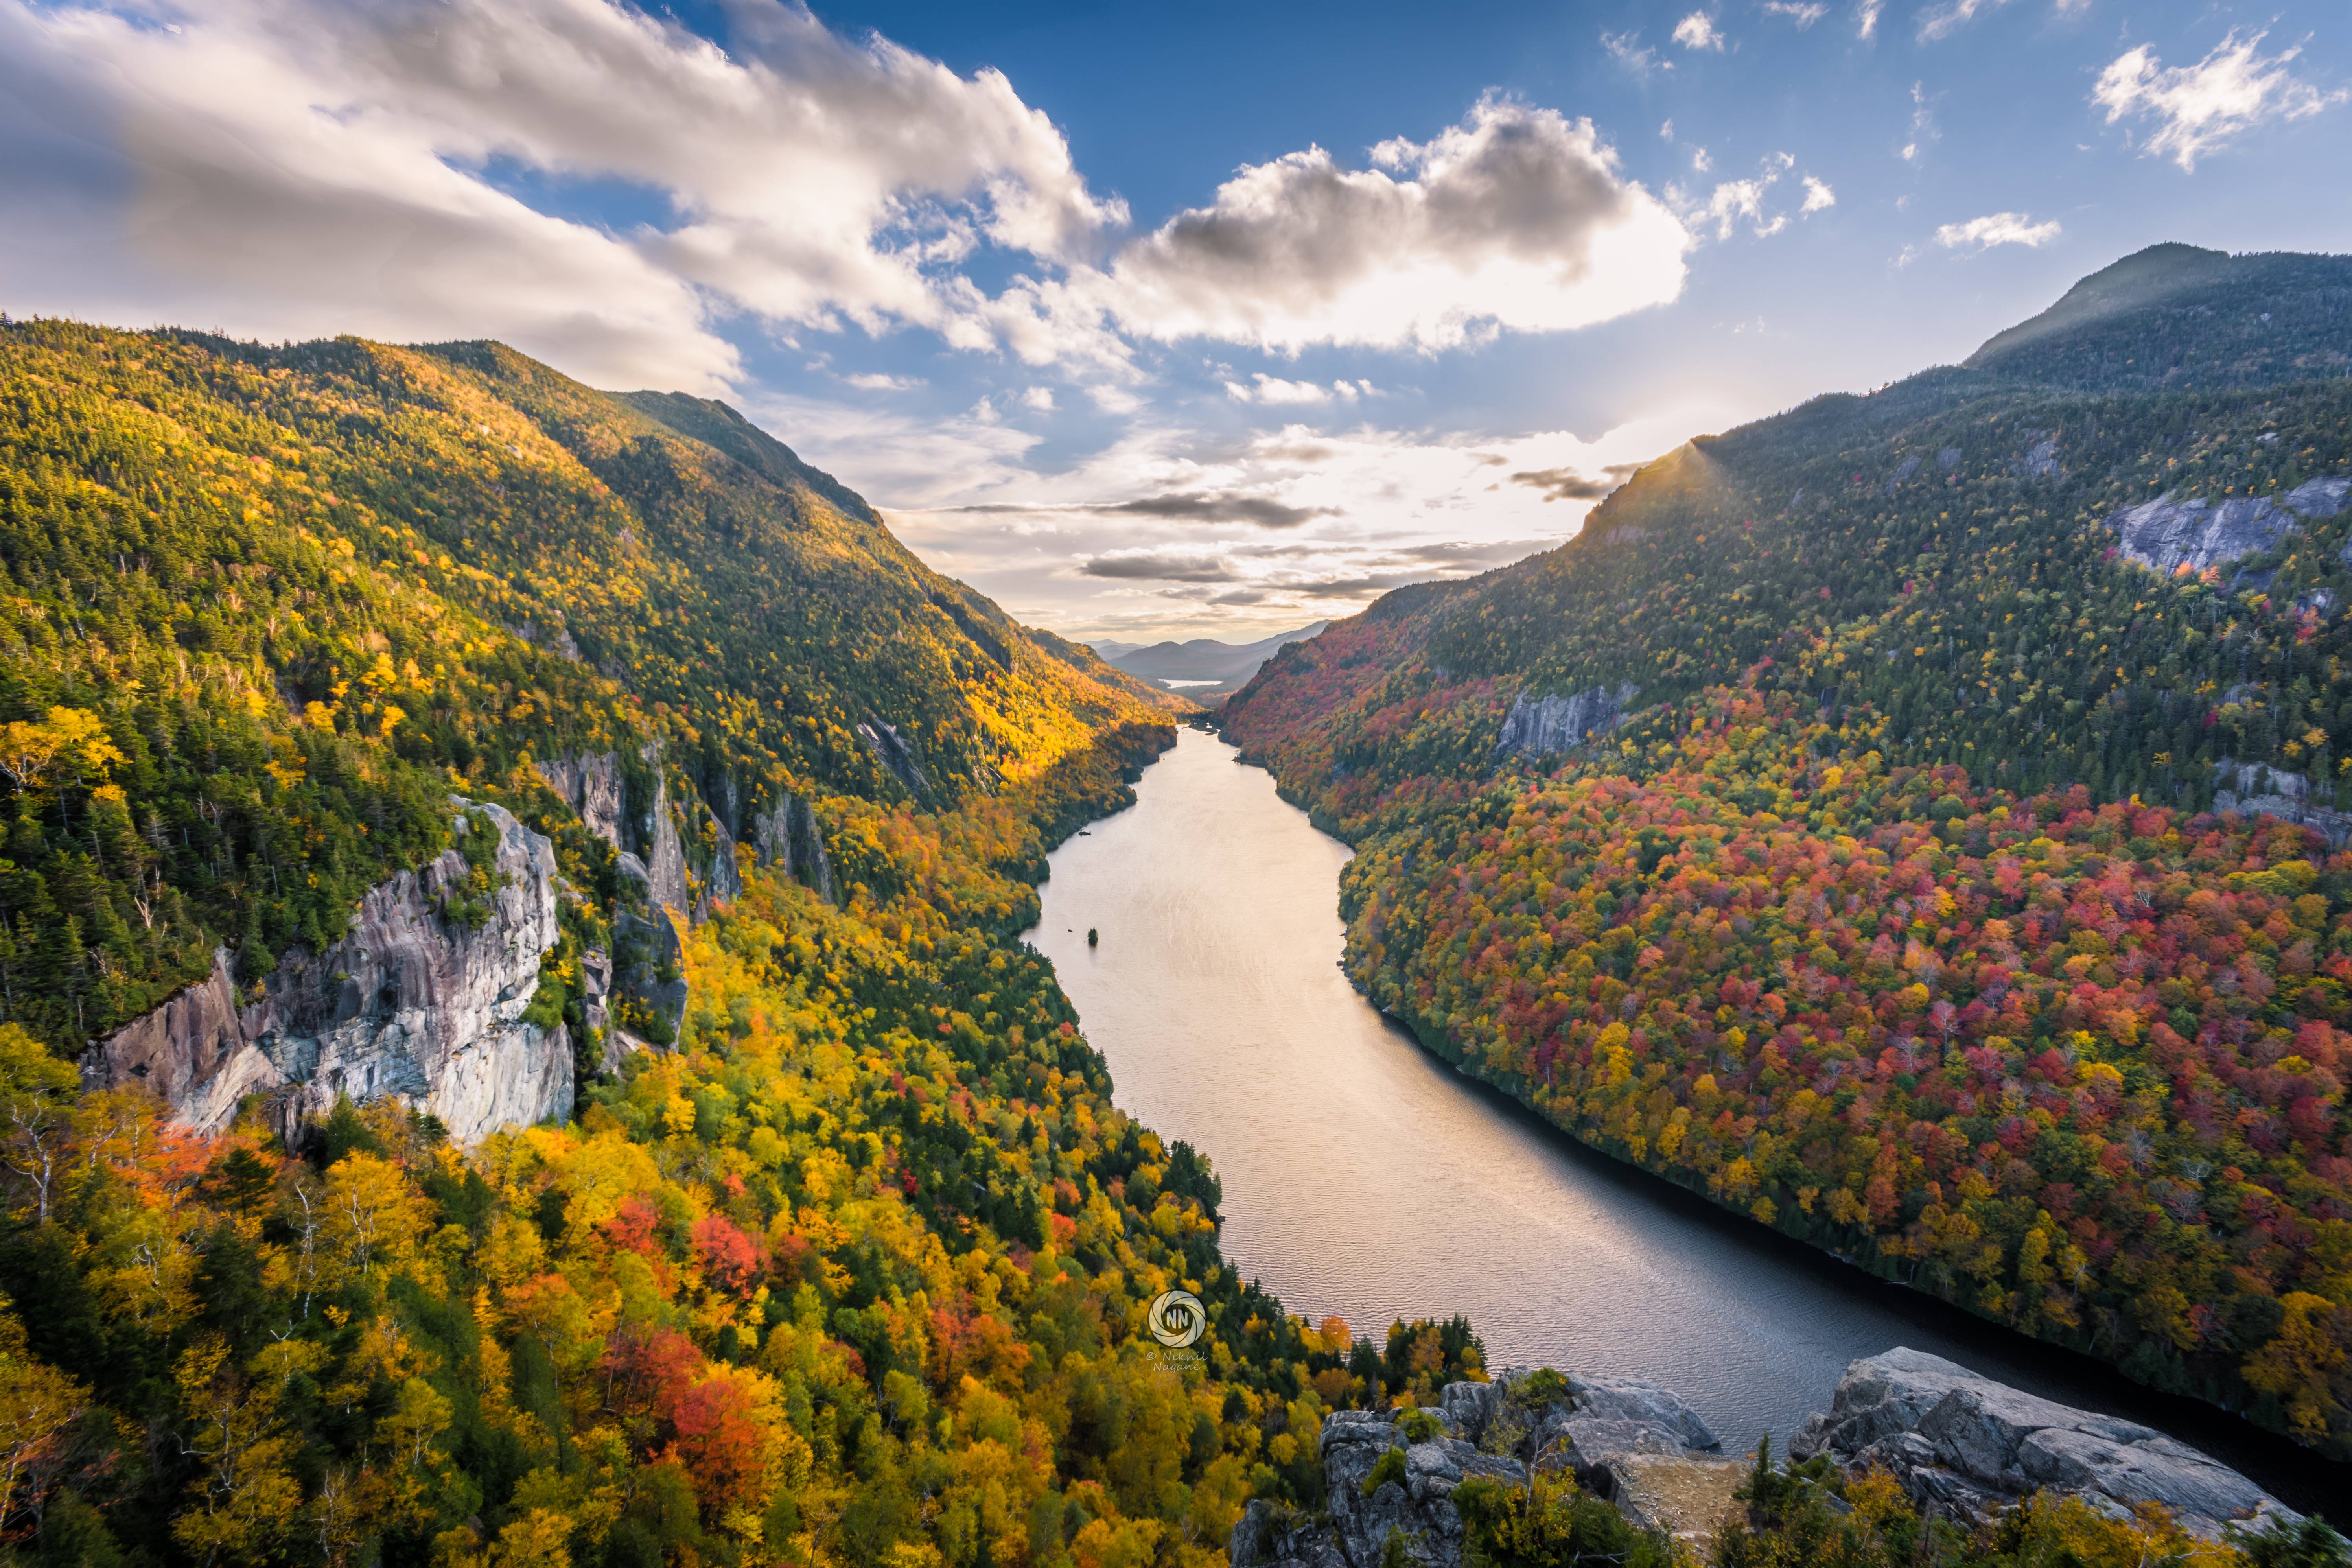 General 5981x3987 New York state river mountains trees clouds fall